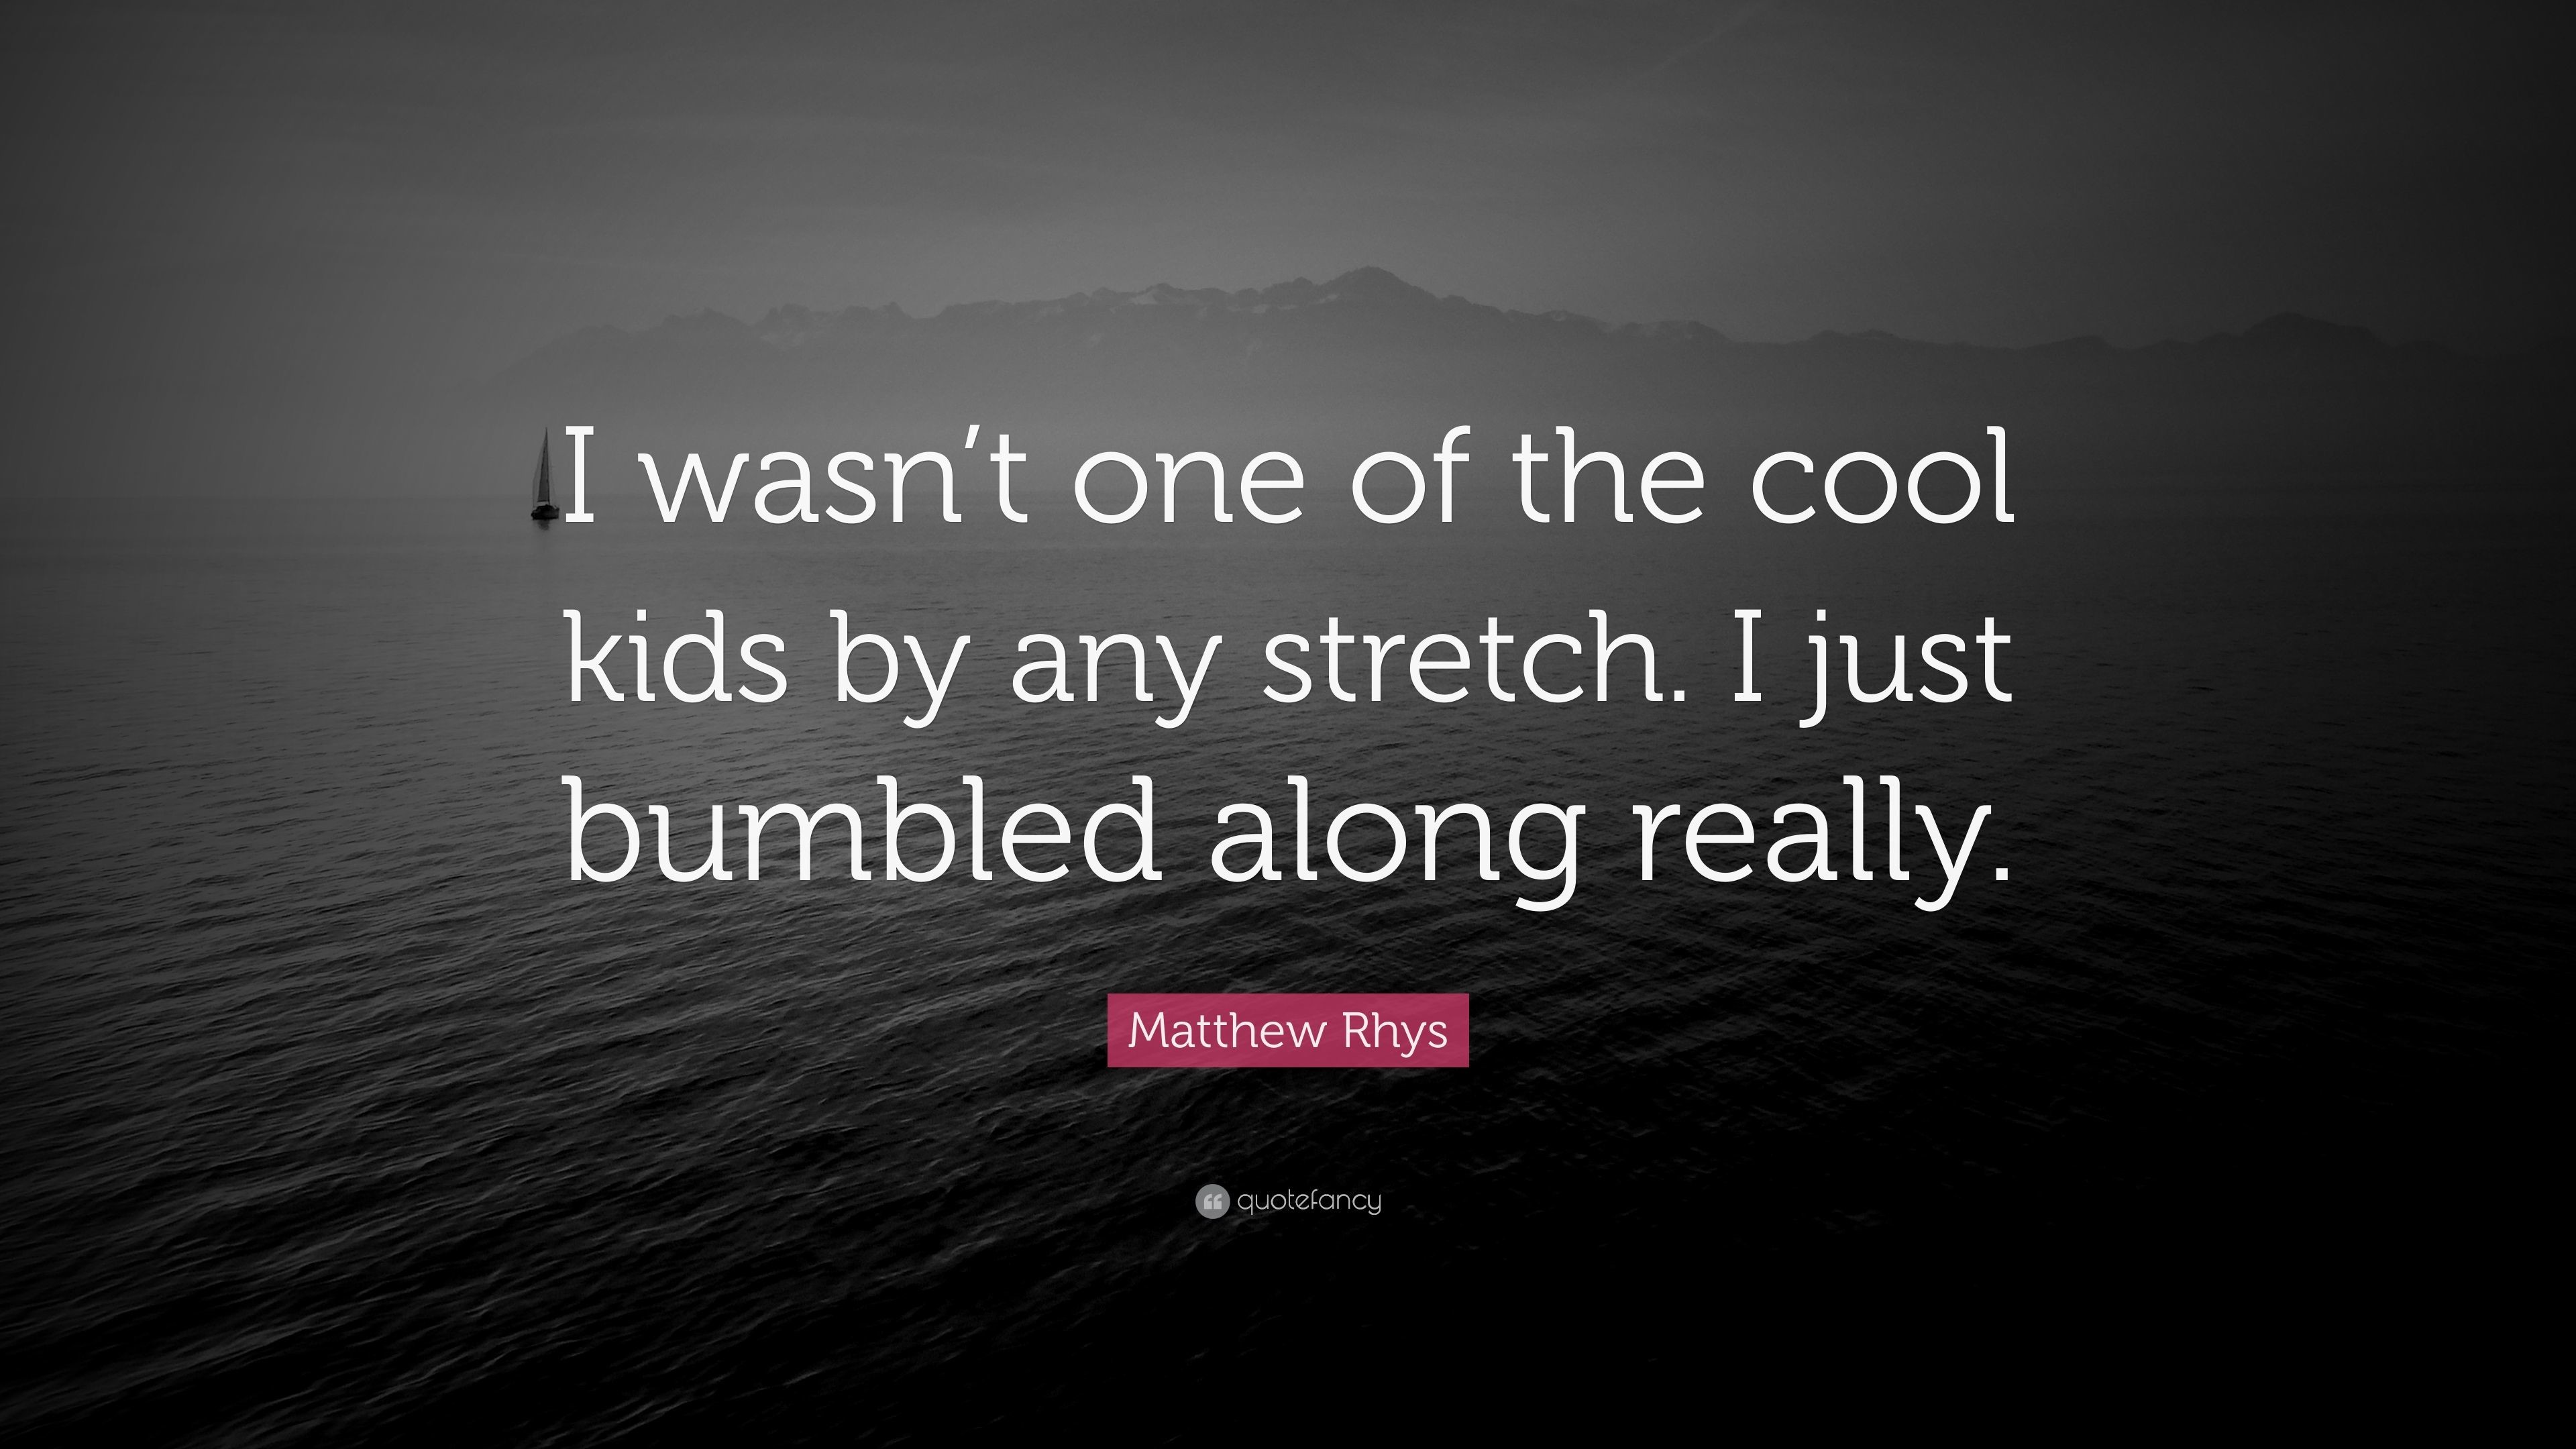 3840x2160 Matthew Rhys Quote: “I wasn't one of the cool kids by any